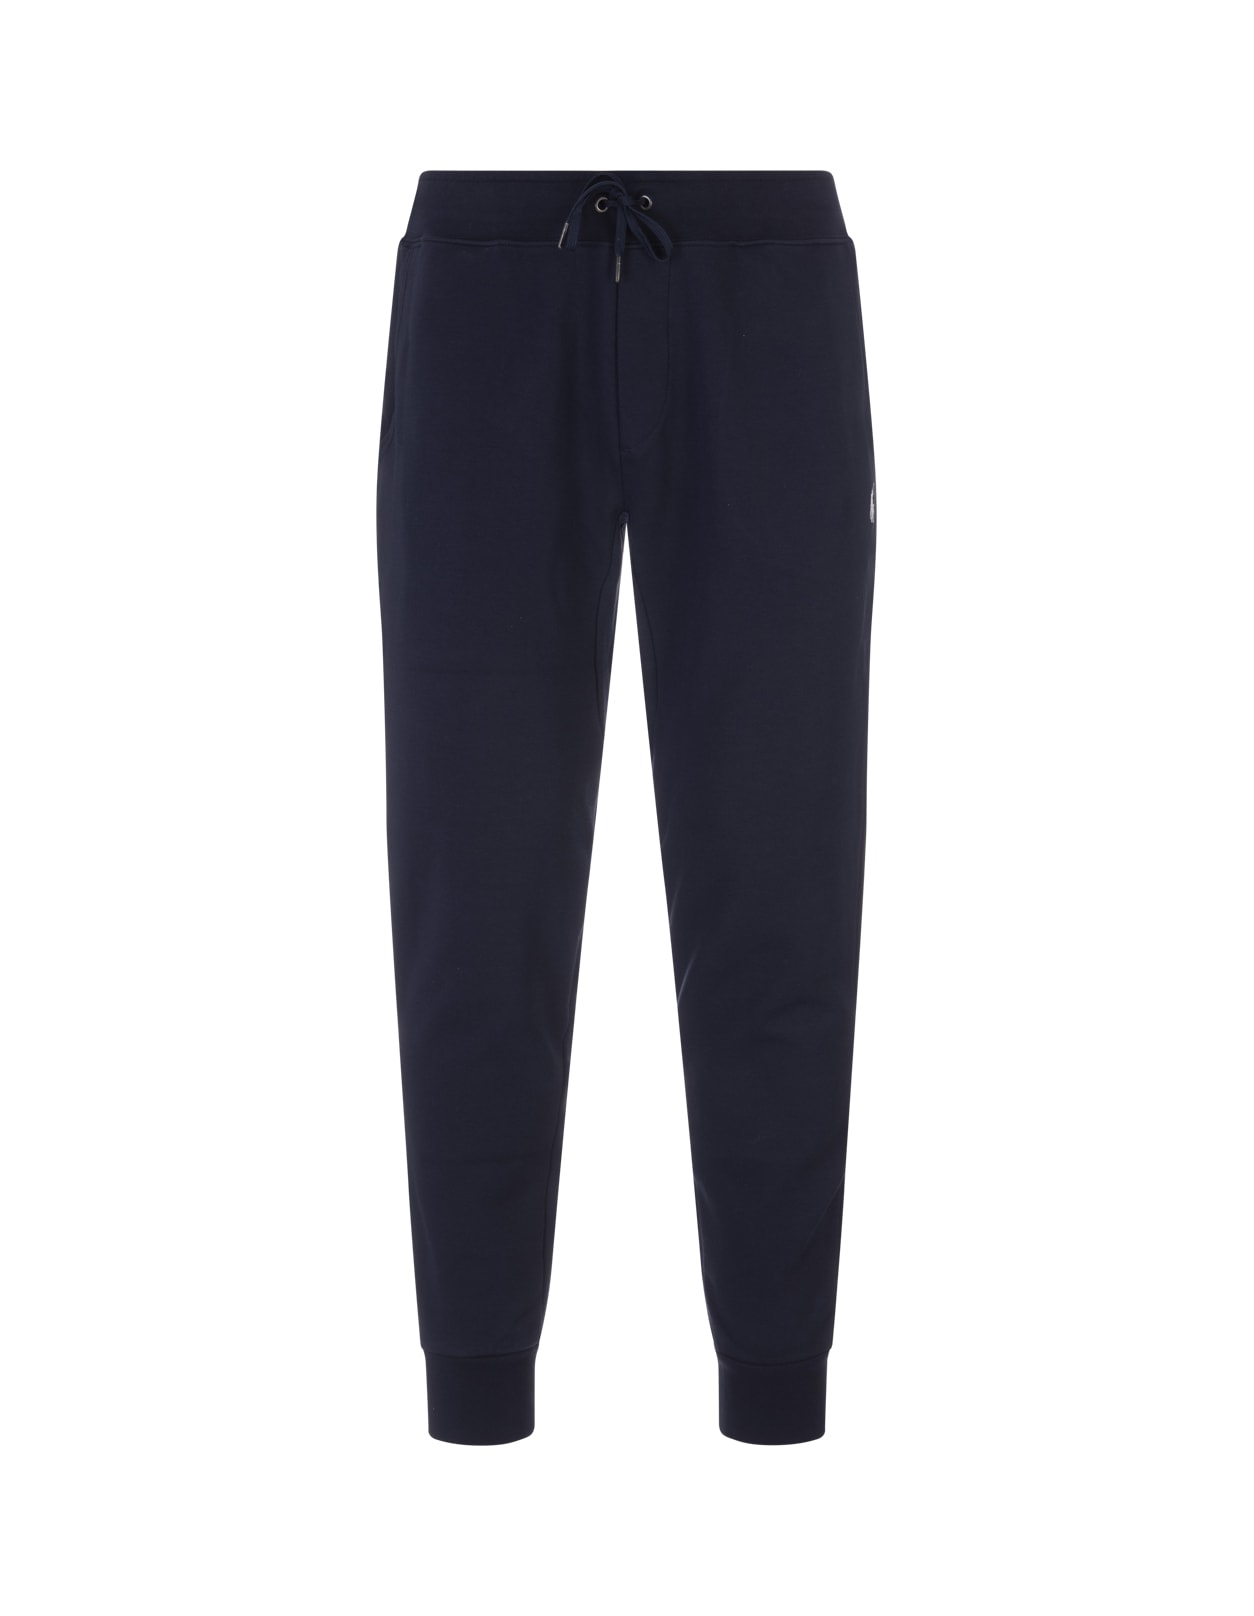 Ralph Lauren Man Navy Blue Joggers With White Pony